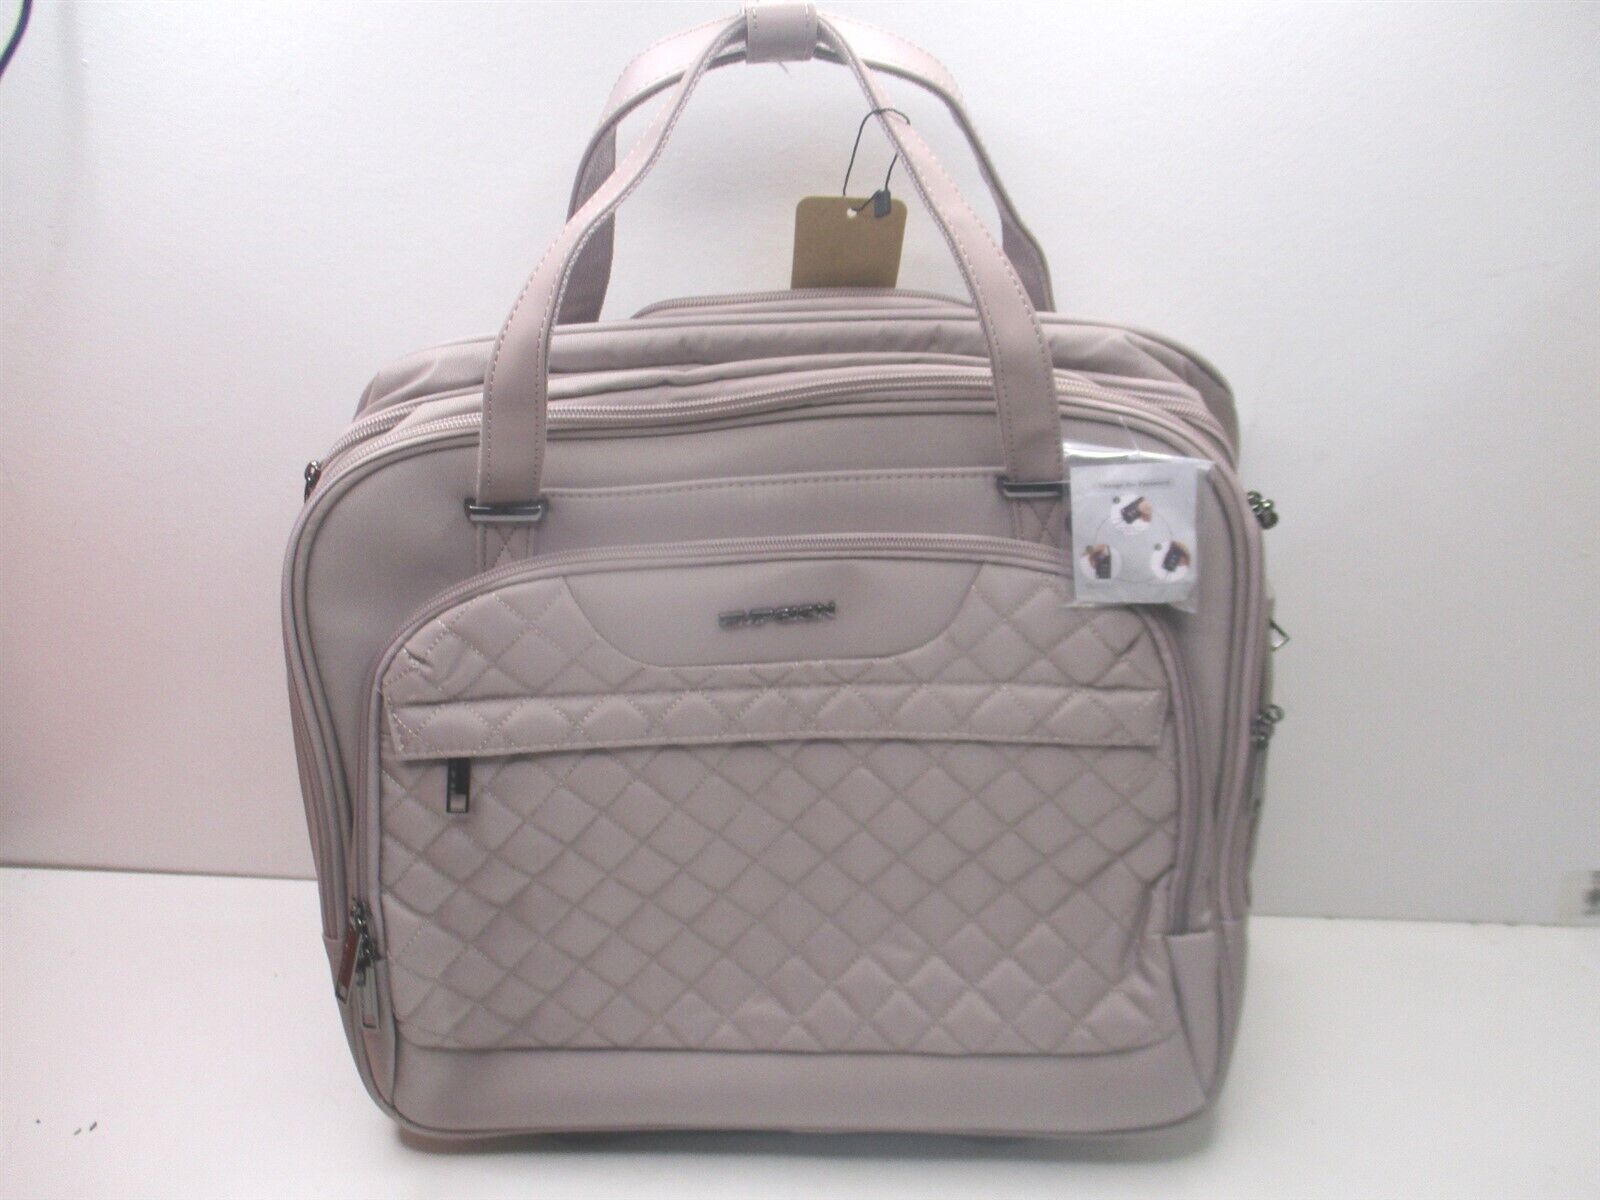 Empsign Grey Pink Rolling Laptop Bag with Wheels - Fits Up to 15.6 Inch Laptop 